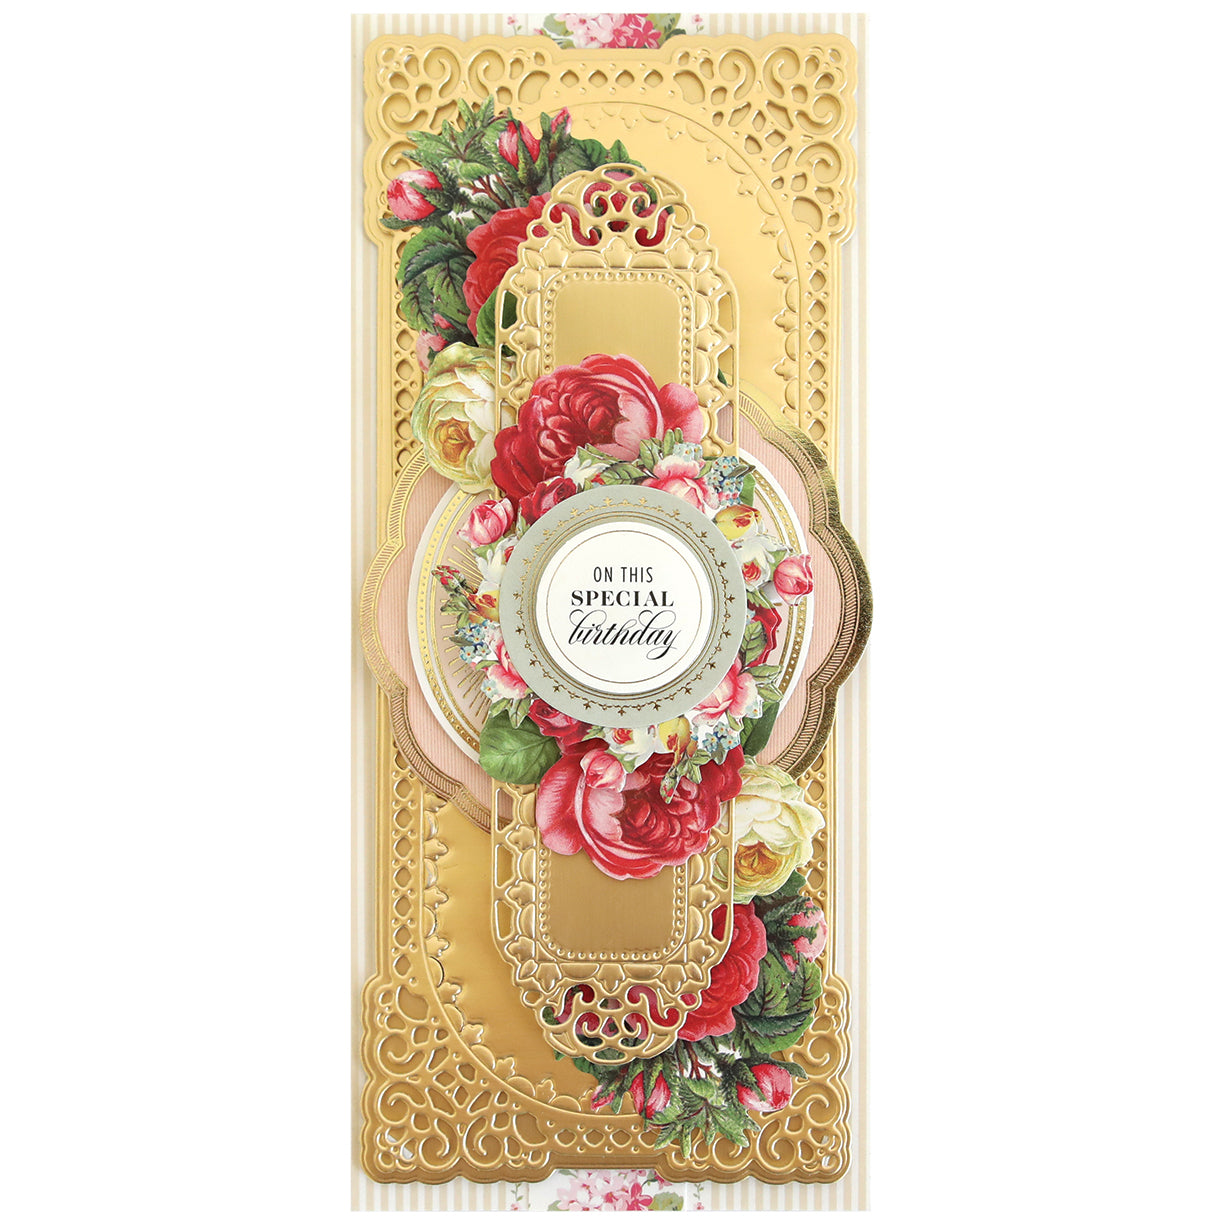 A gold card with roses on it featuring 3D Oblong Slimline Concentric Frame Dies.